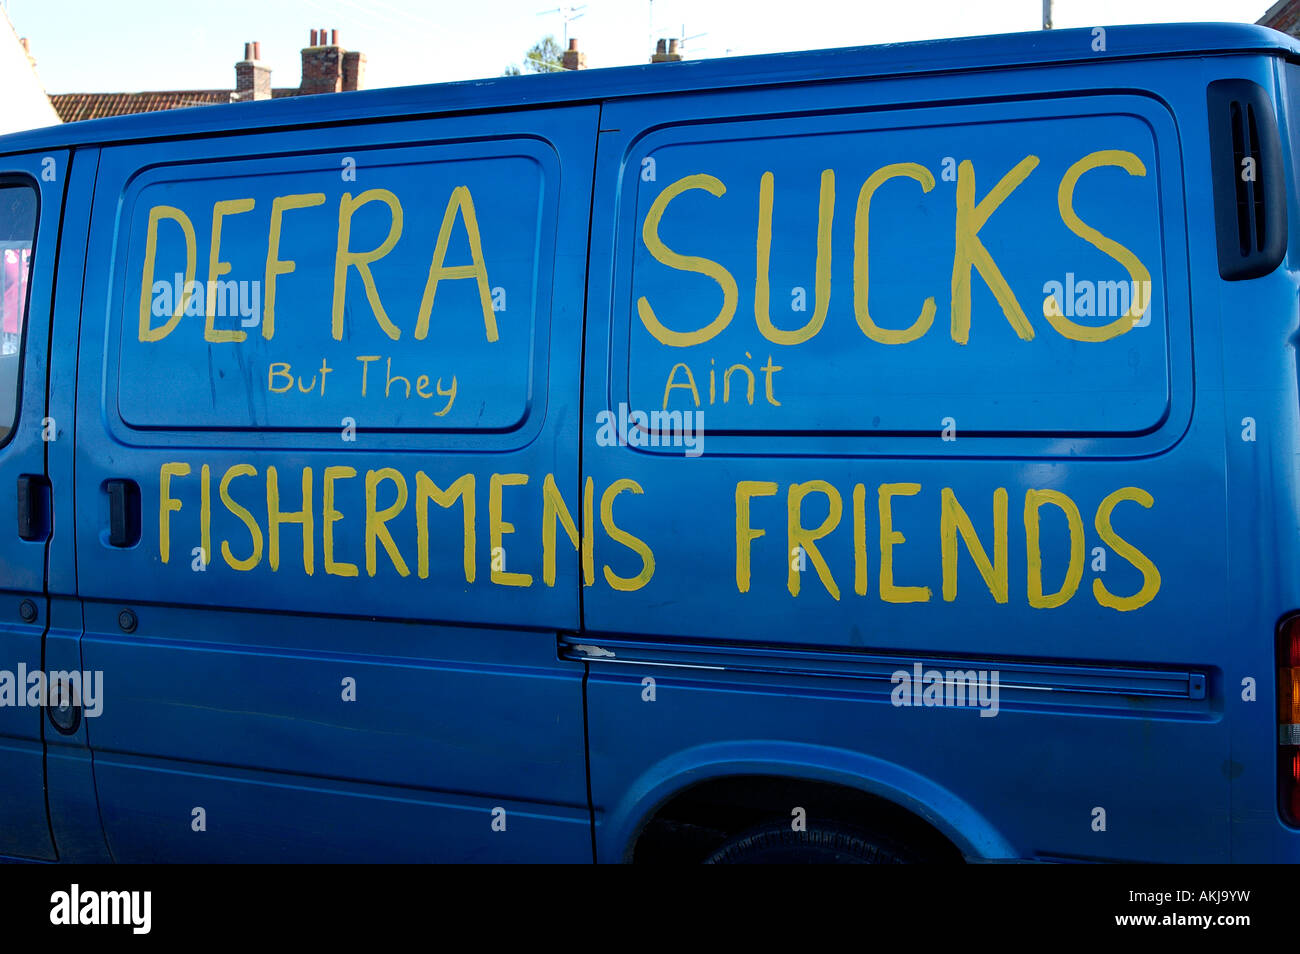 Defra sucks but they aint fishermans friends Protest on Van Stock Photo